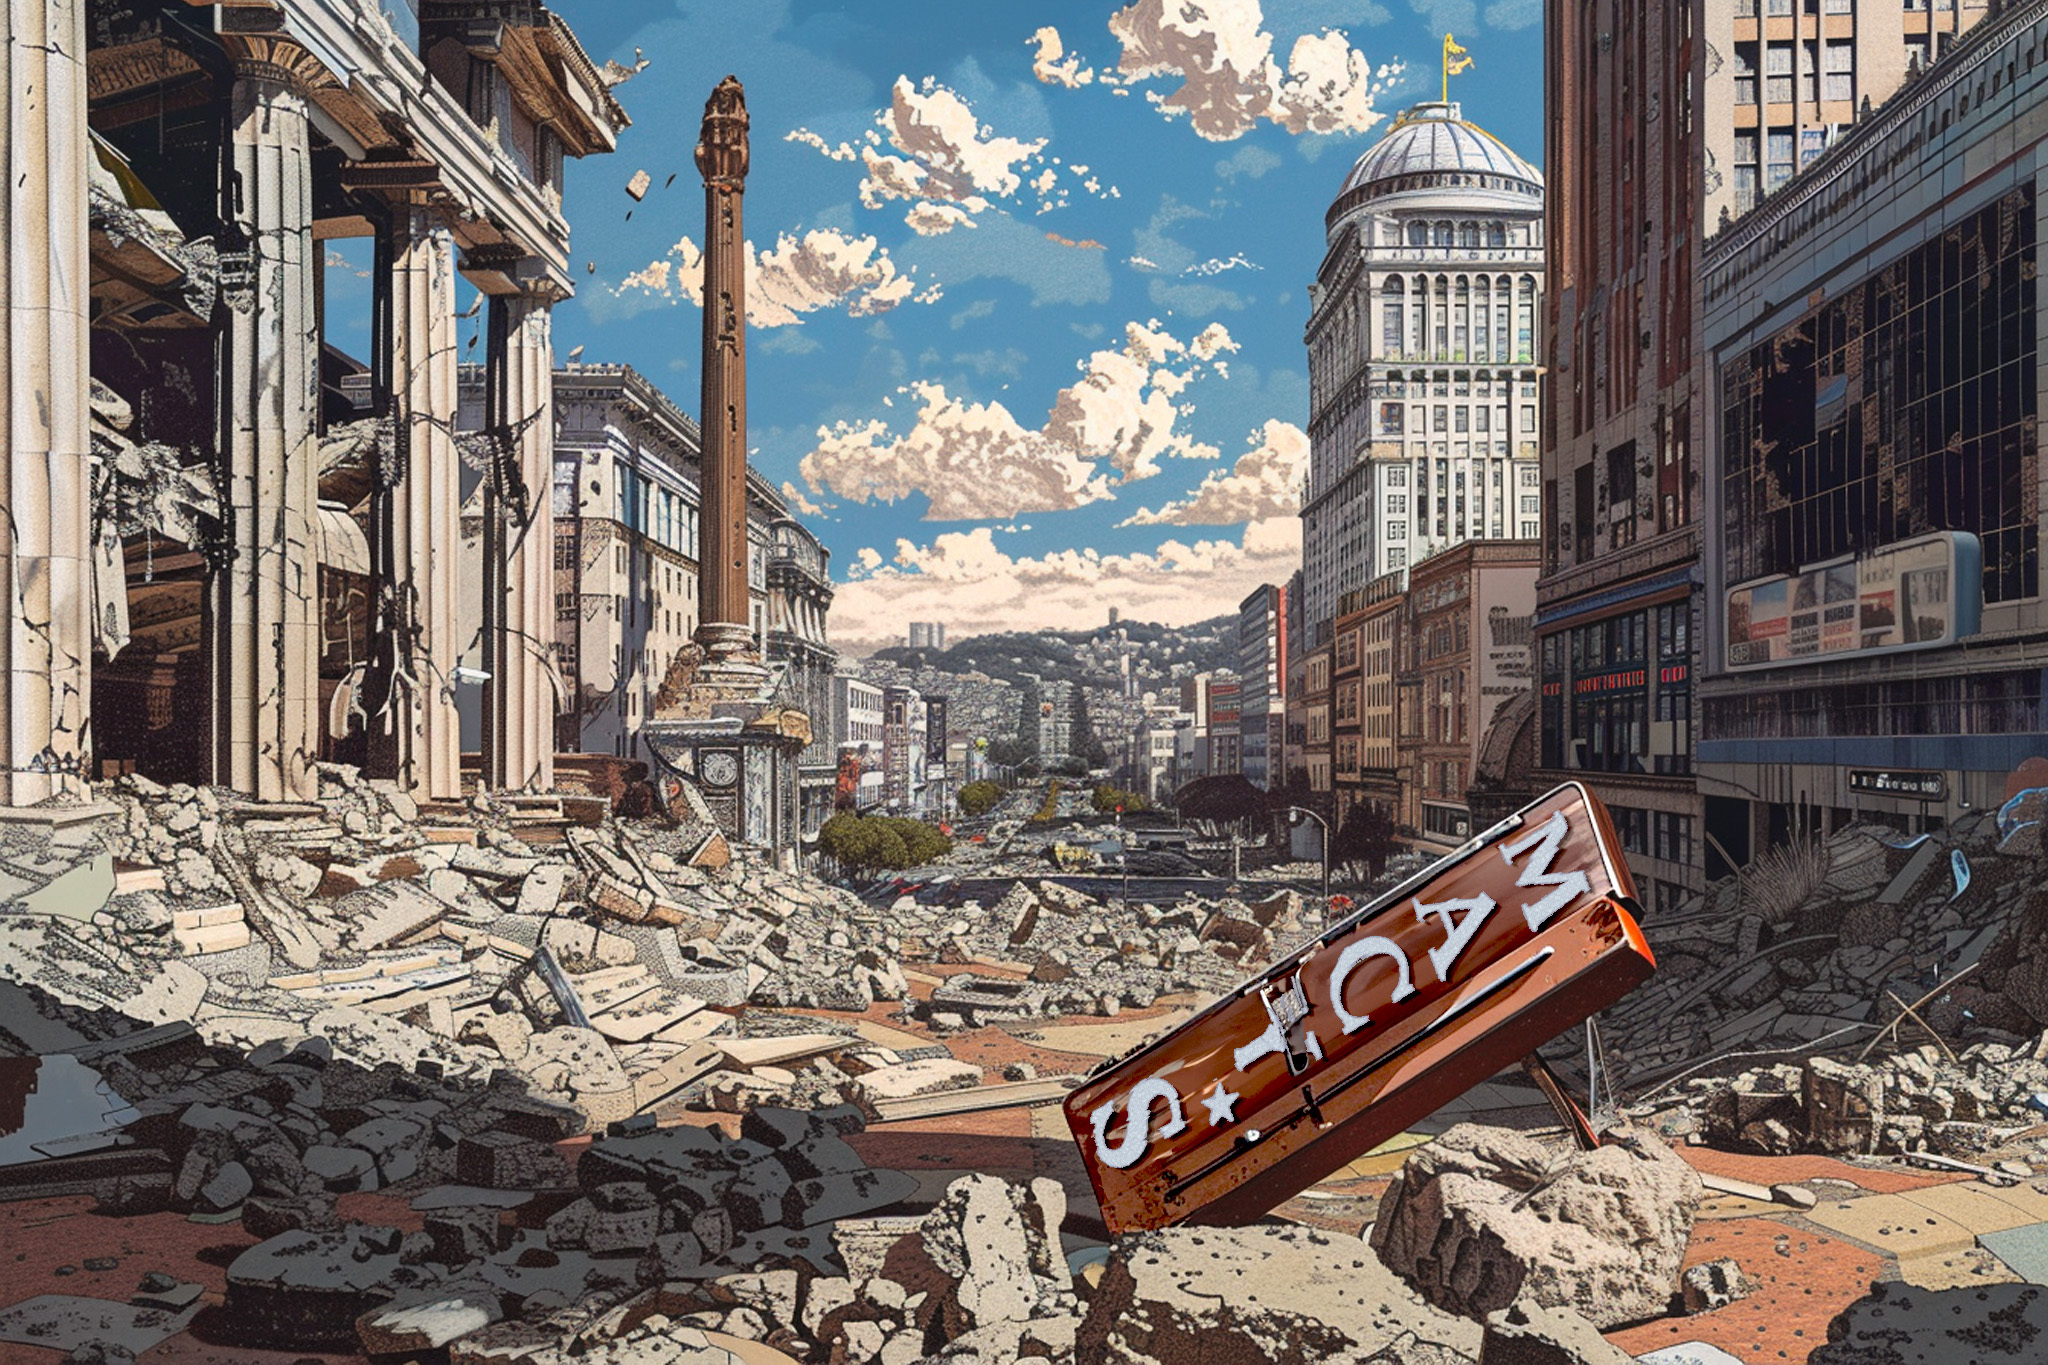 A devastated urban street with rubble, a toppled Macy's sign, and damaged classical and modern buildings under a cloudy sky.